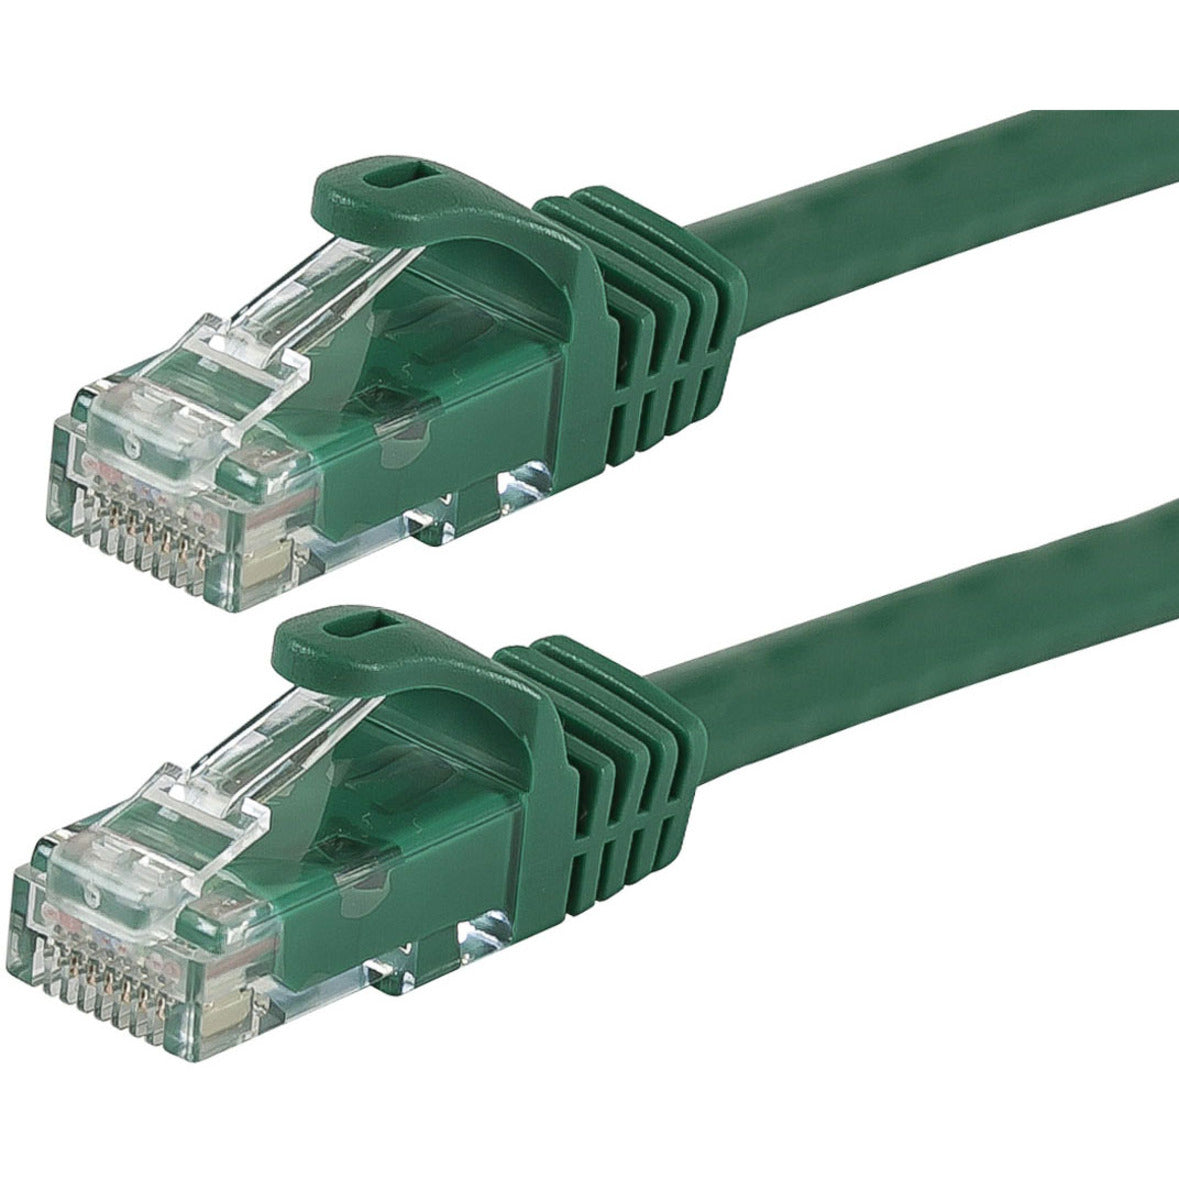 Monoprice 11337 FLEXboot Series Cat6 24AWG UTP Ethernet Network Patch Cable, 3ft Green, Stranded, Snagless